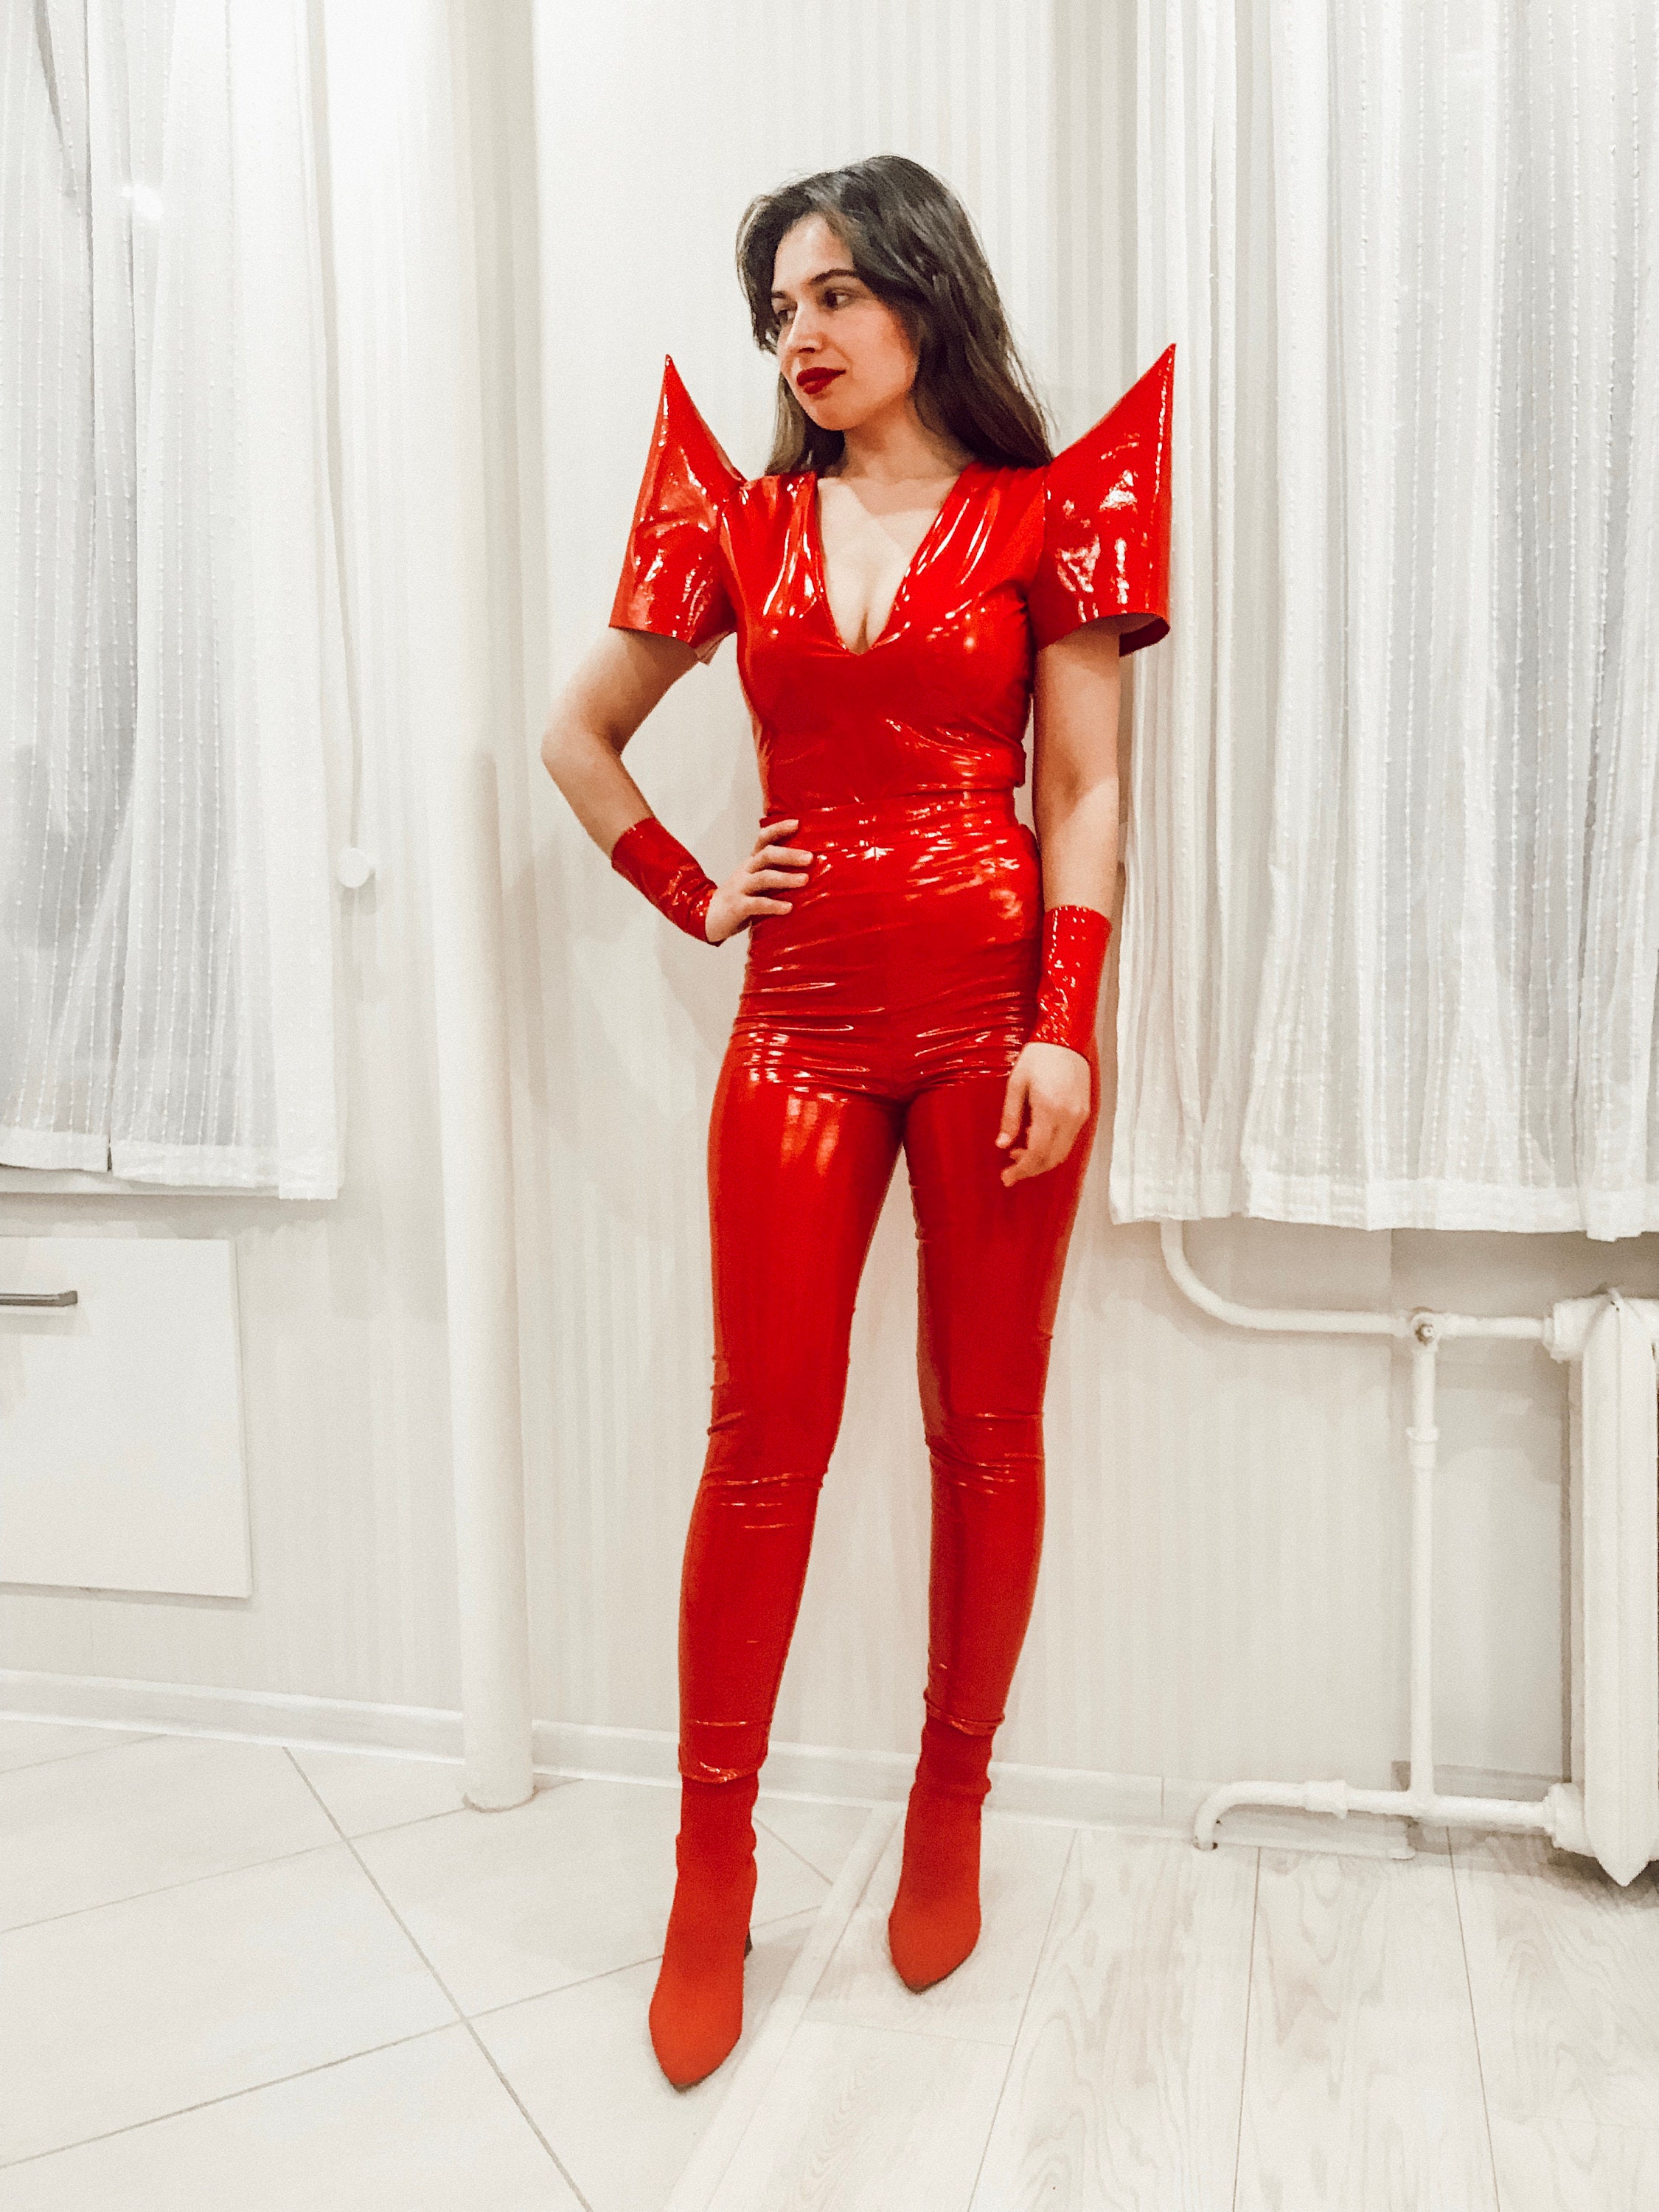 PVC Red Leather Catsuit With a Back Zipper Tight Jumpsuit | Etsy Canada